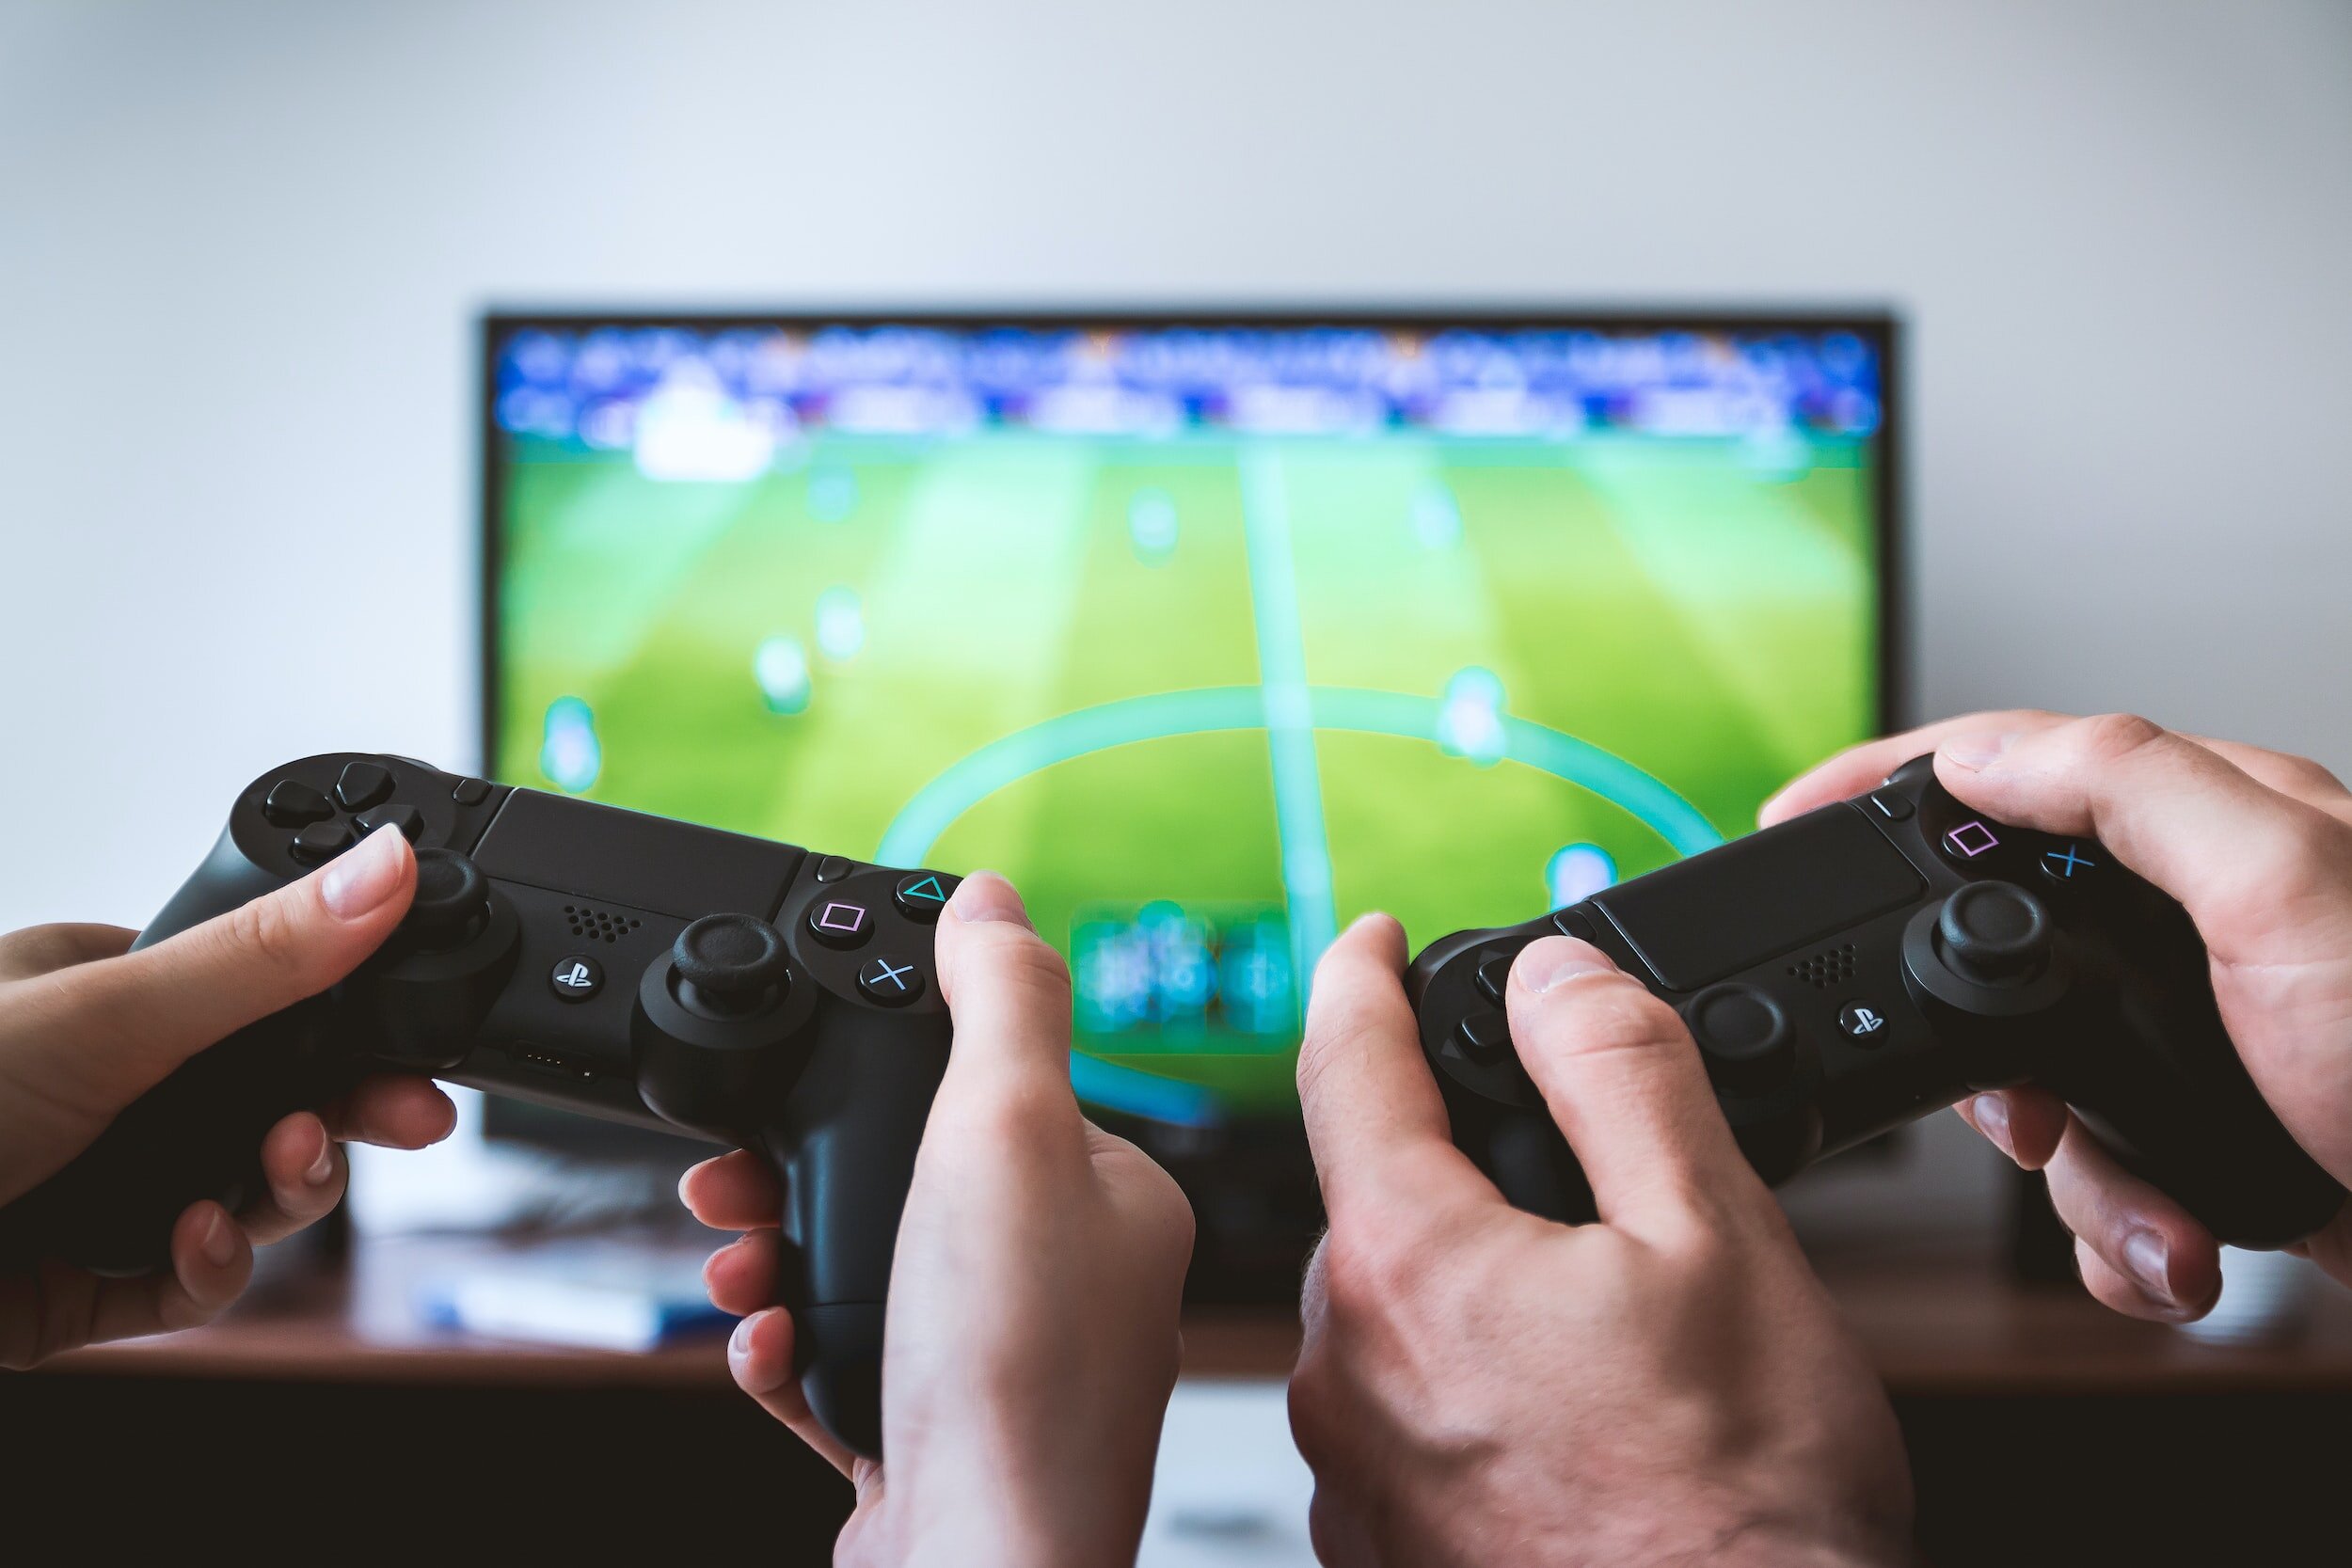 Exposure to offensive content on social media and multiplayer games